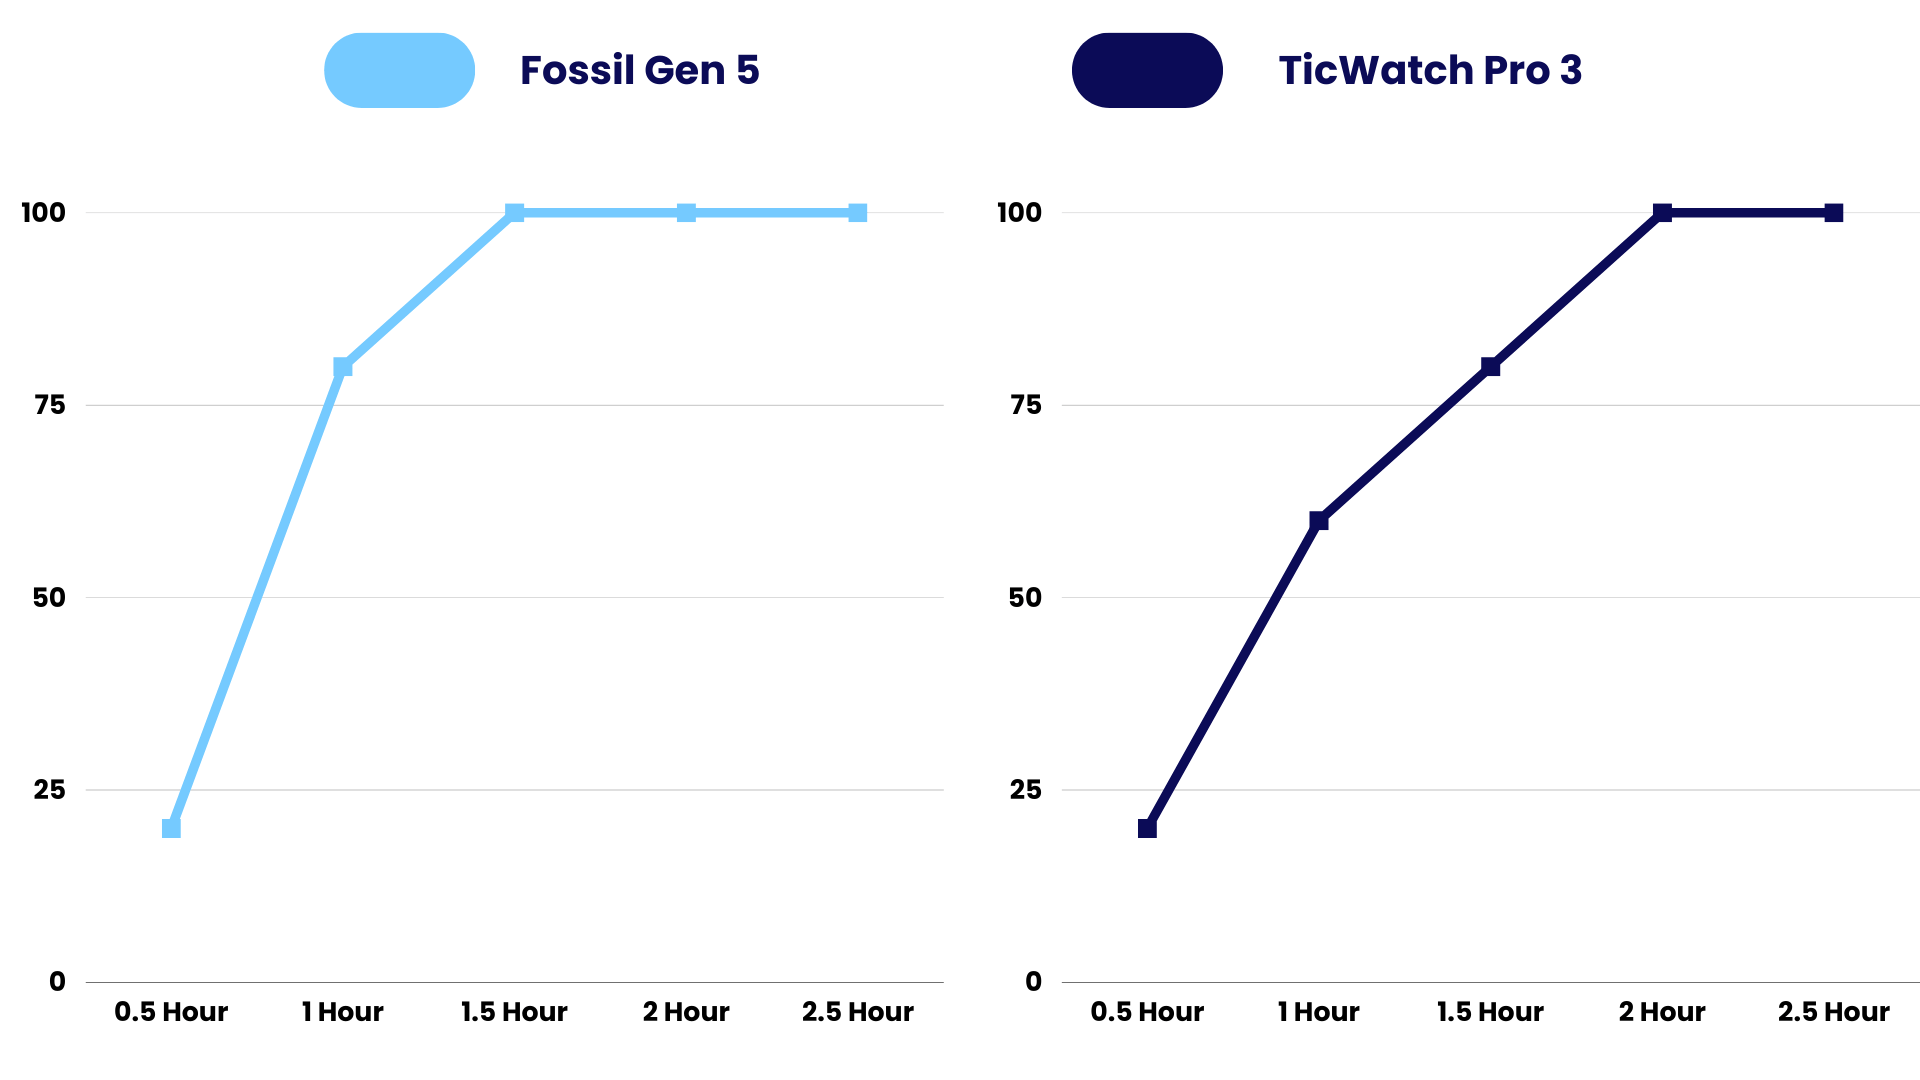 Charging Time Comparison of Fossil Gen 5 vs TicWatch Pro 3